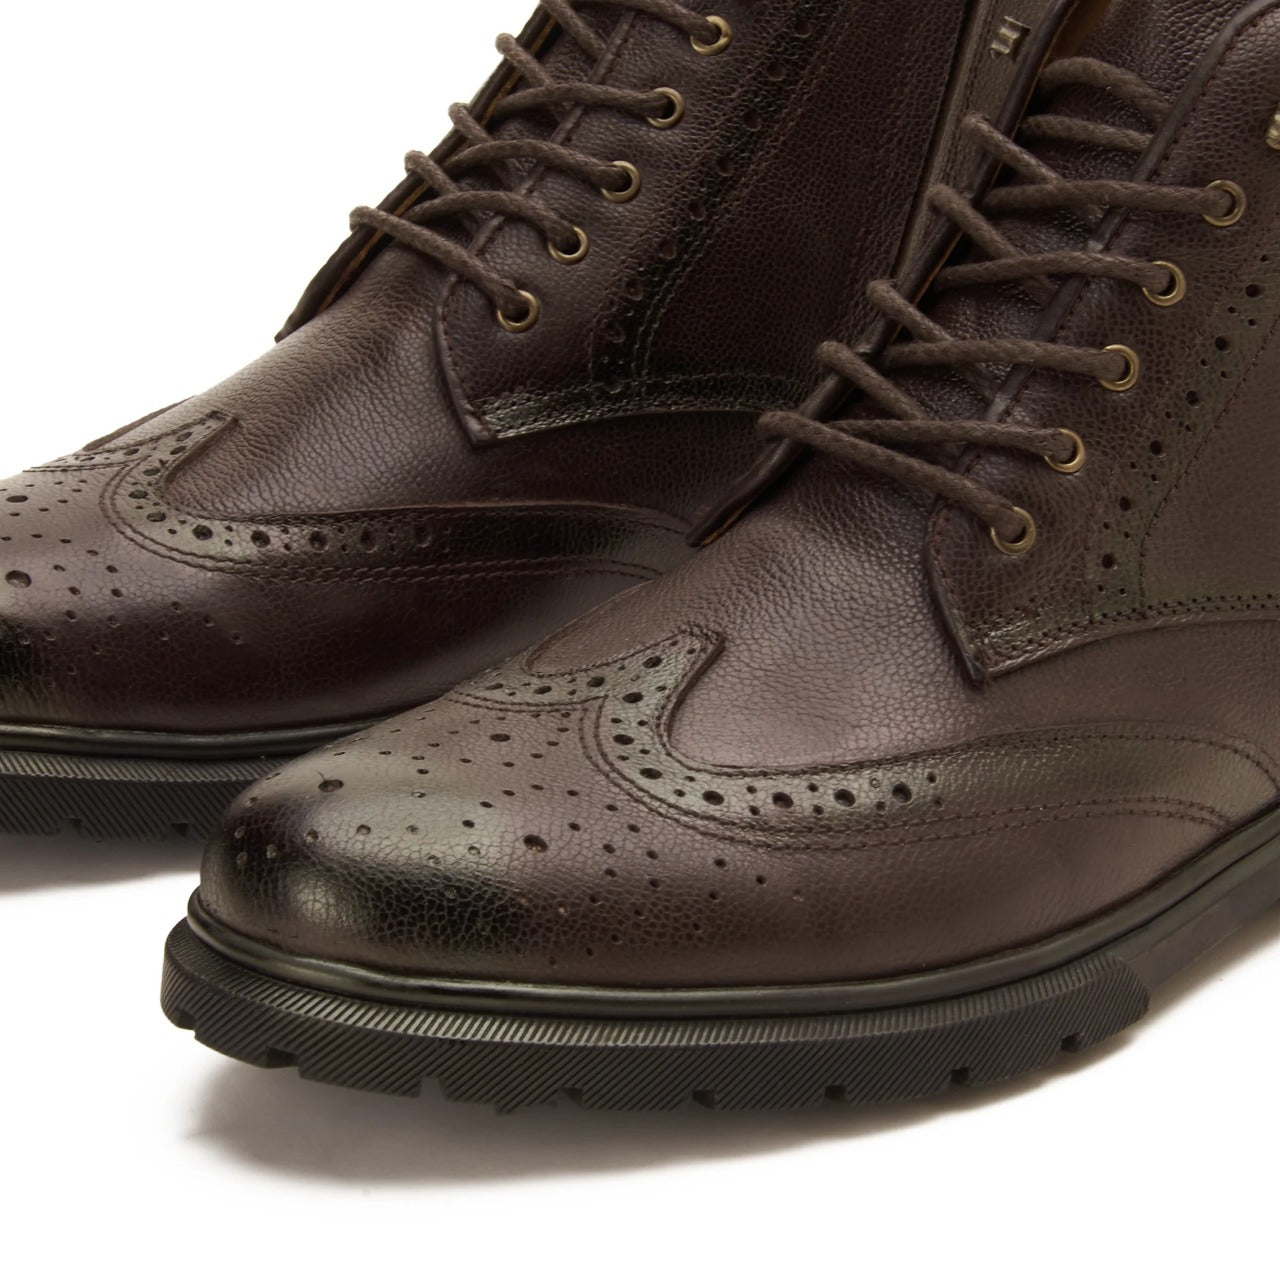 Oxford leather Boot with side zipper - Brown